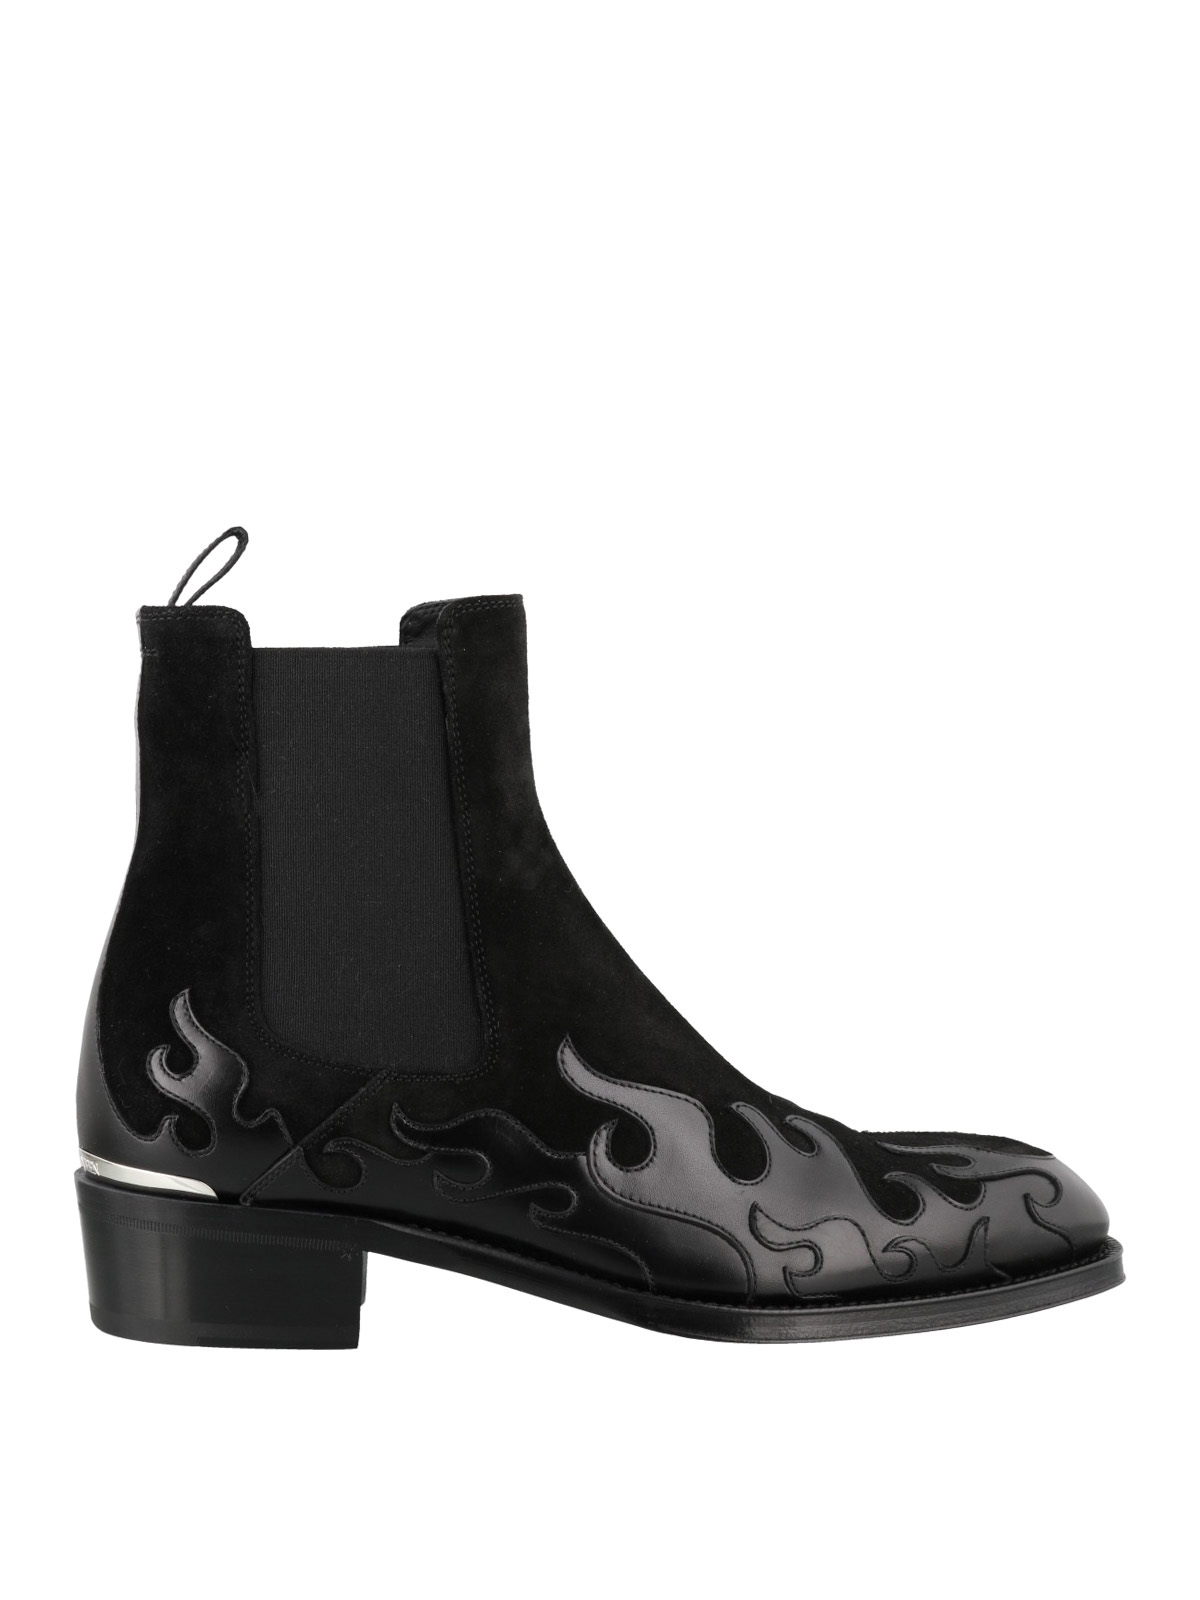 Ankle boots Alexander Mcqueen - Flame leather and suede booties